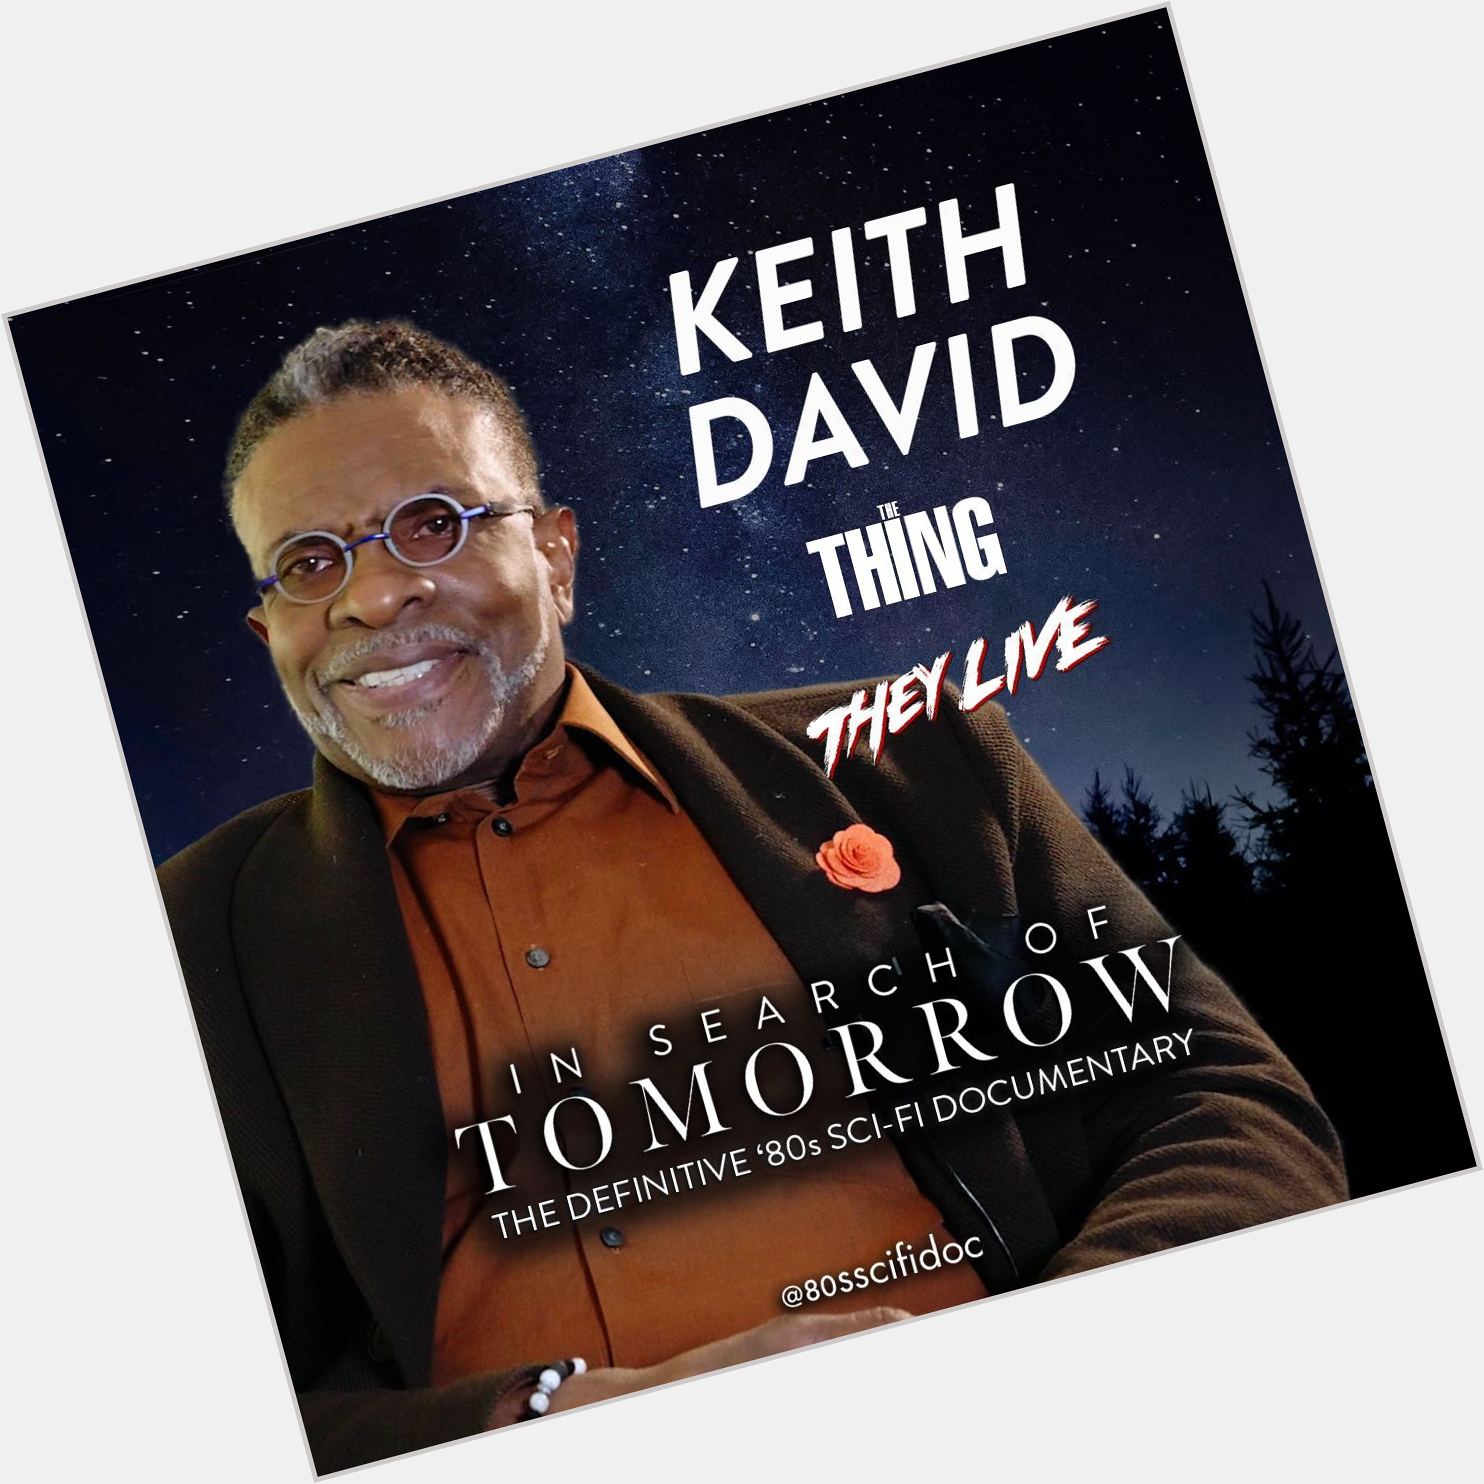 Happy Birthday to legendary actor Keith David star of THE THING, THEY LIVE, and more    